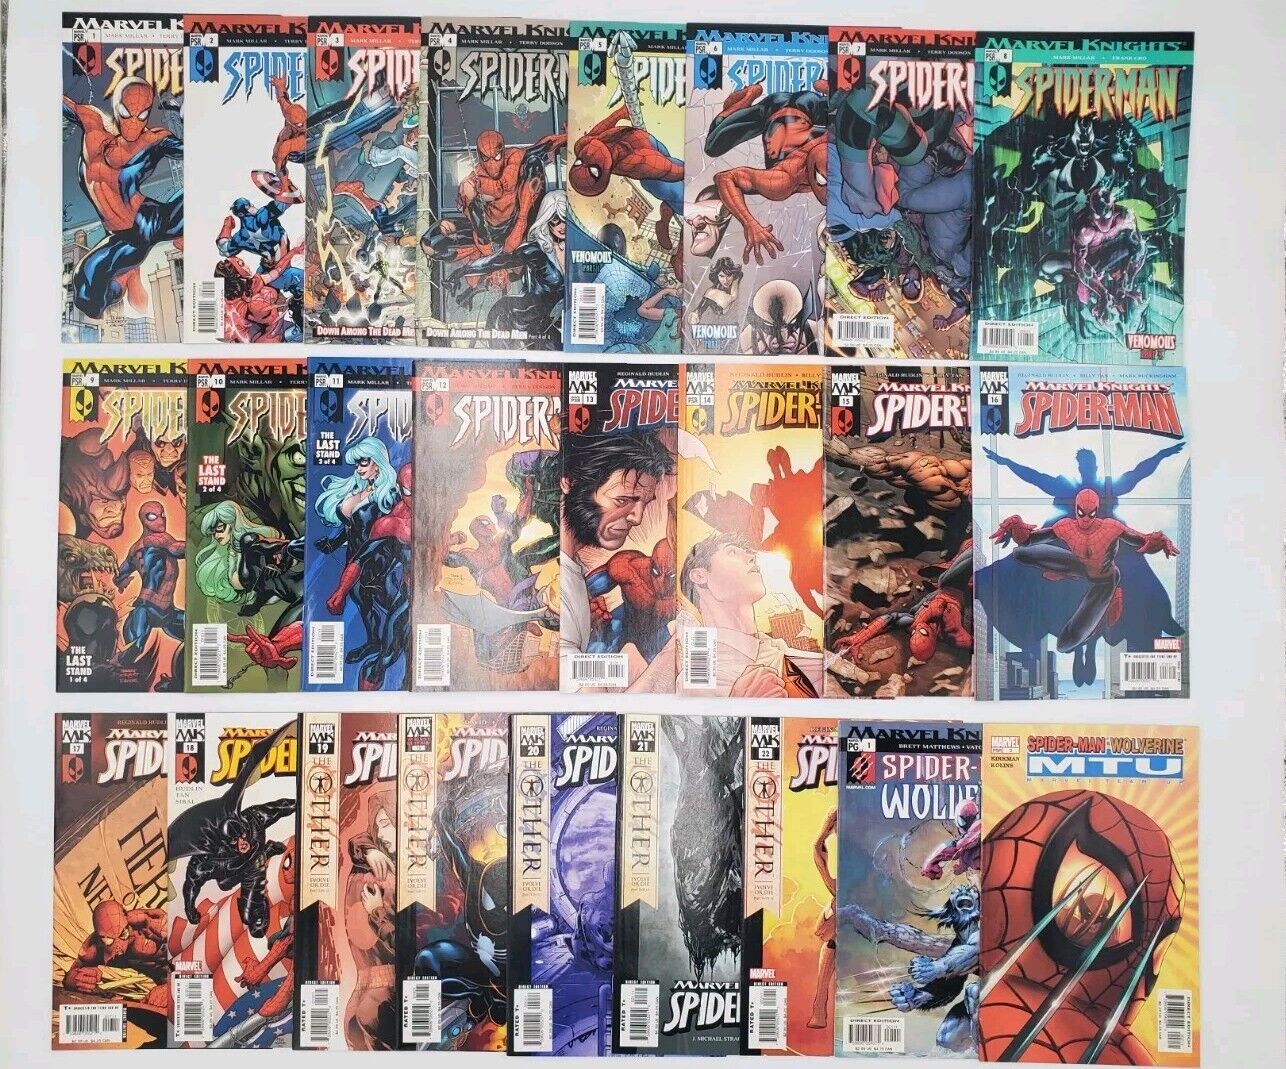 Marvel Knights Spider-Man # 1-22 COMPLETE RUN 2004 Lot of 25 Comics Wolverine 